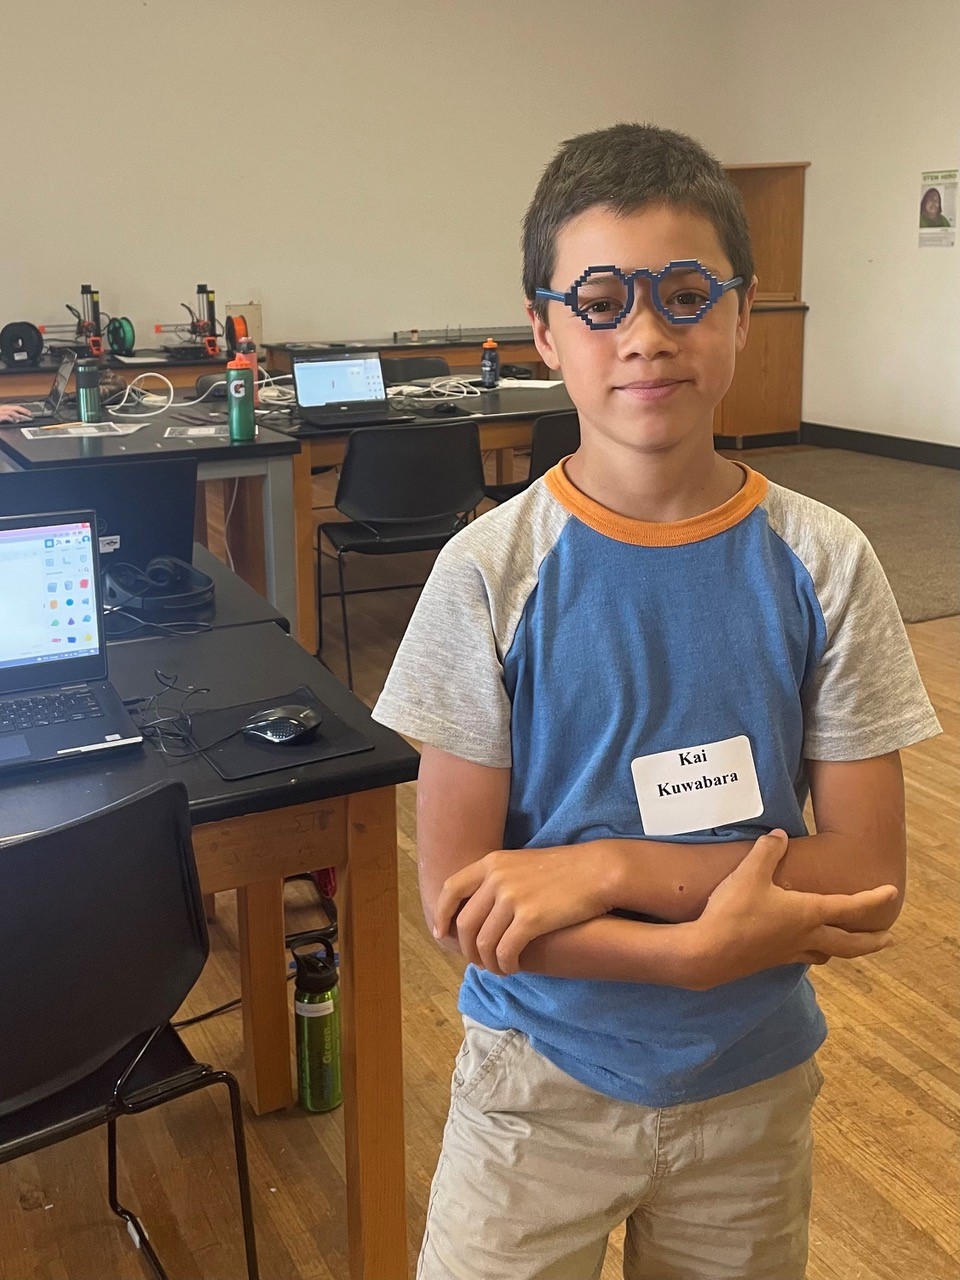 Elementary students turn imaginative ideas into tangible creations at SCORE’s 3D Printing and Design Camp